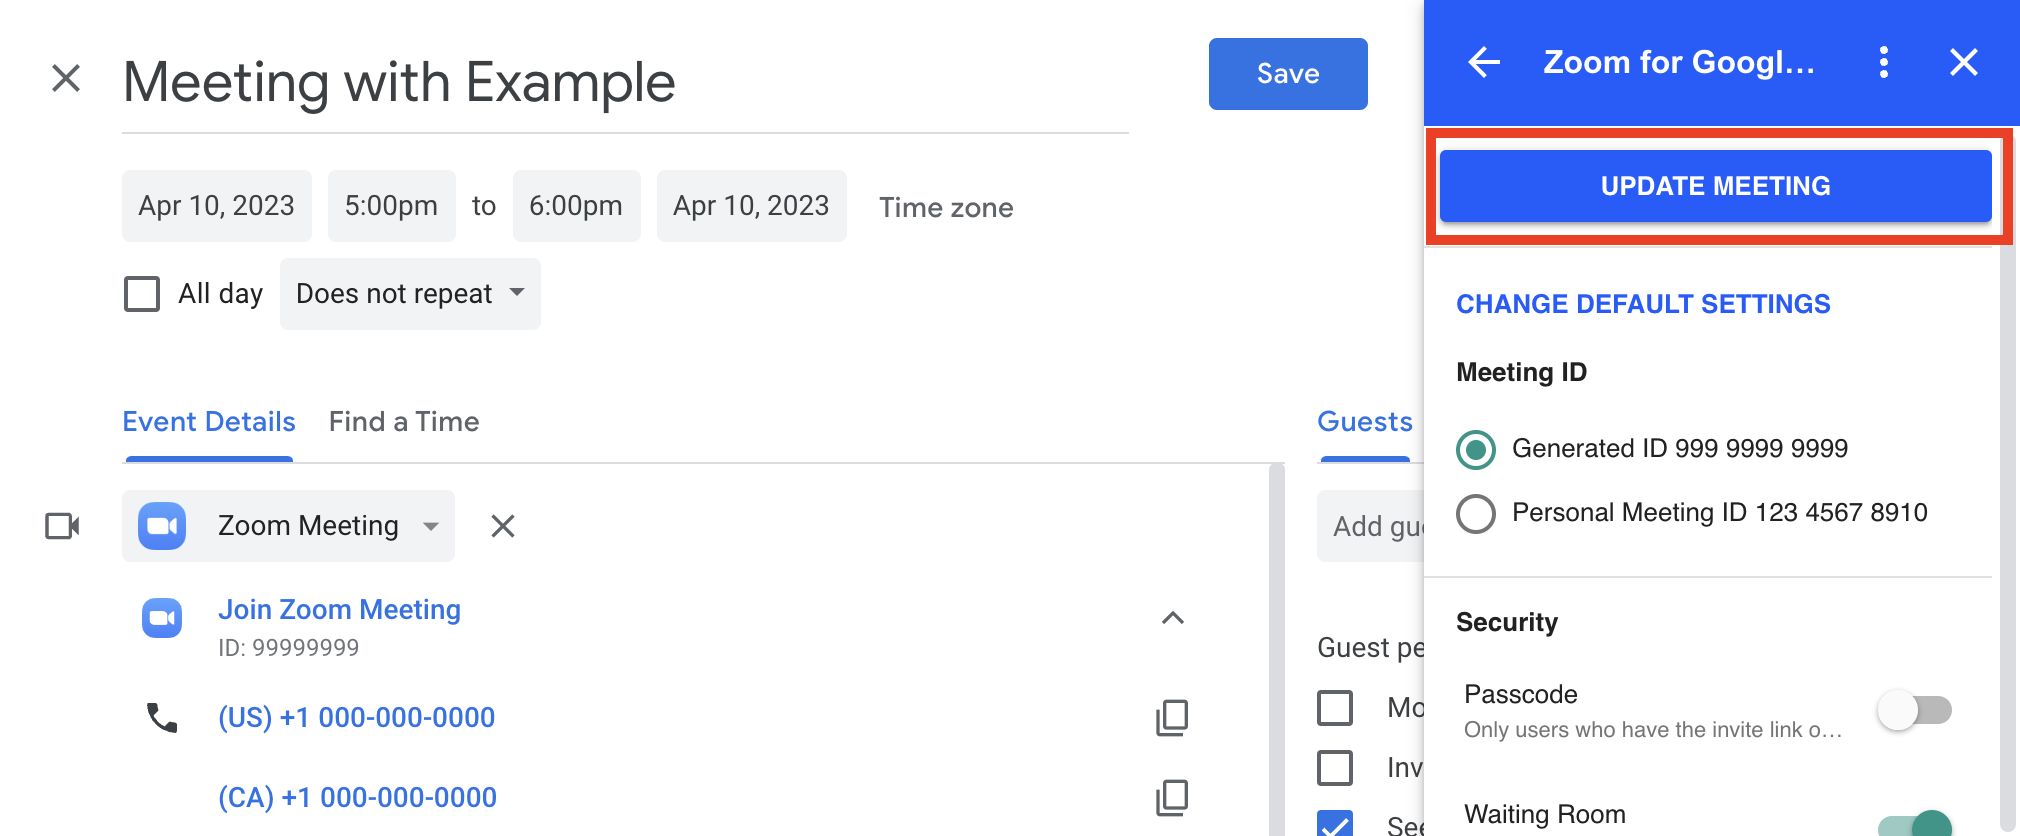 Navigate to the Side Panel within Google Calendar. Use the down arrow key to select Zoom for Google Workspace. Make your changes and then select Update Setting button.